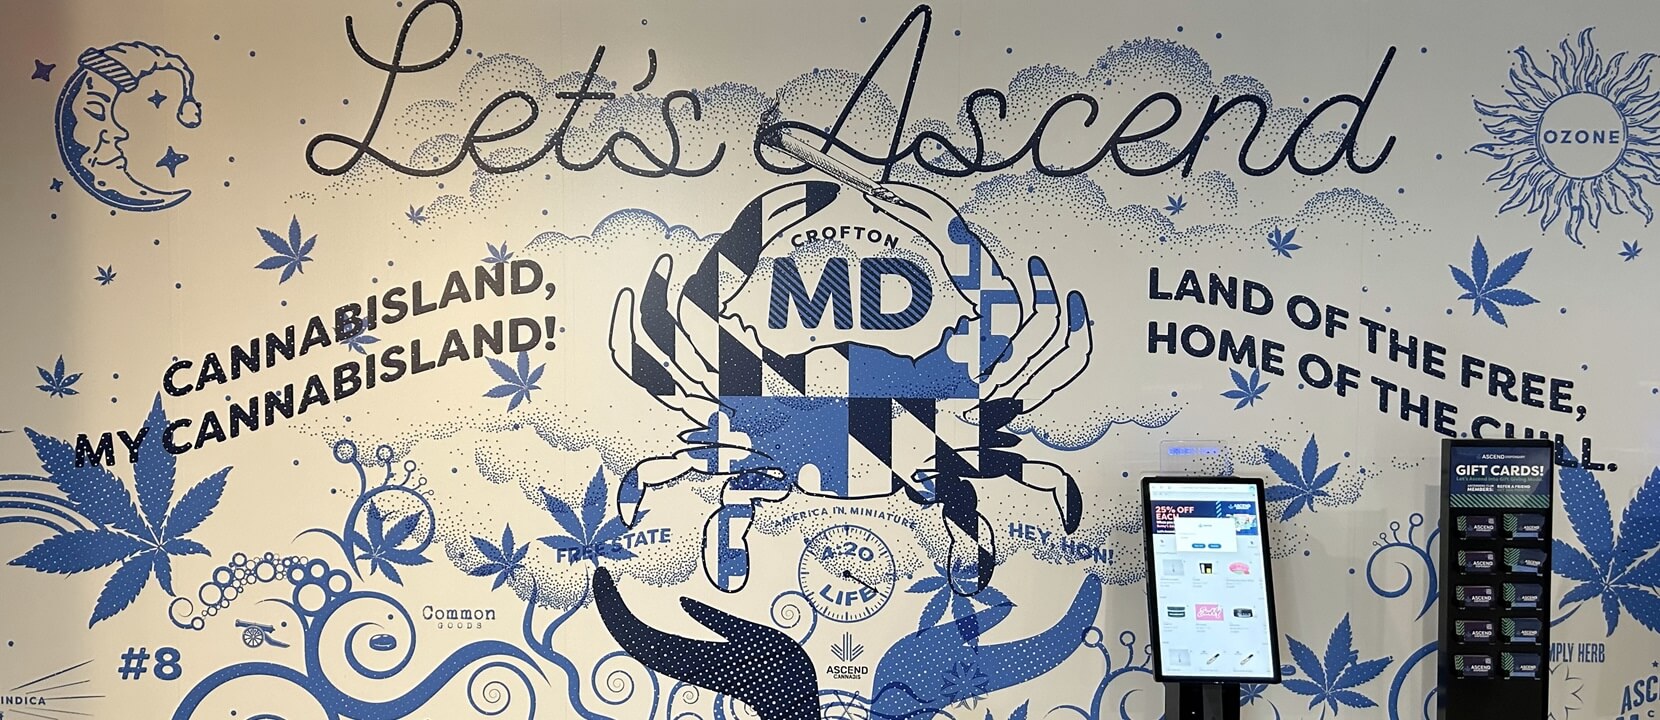 Ascend Cannabis Dispensary Crofton MD wall graphic